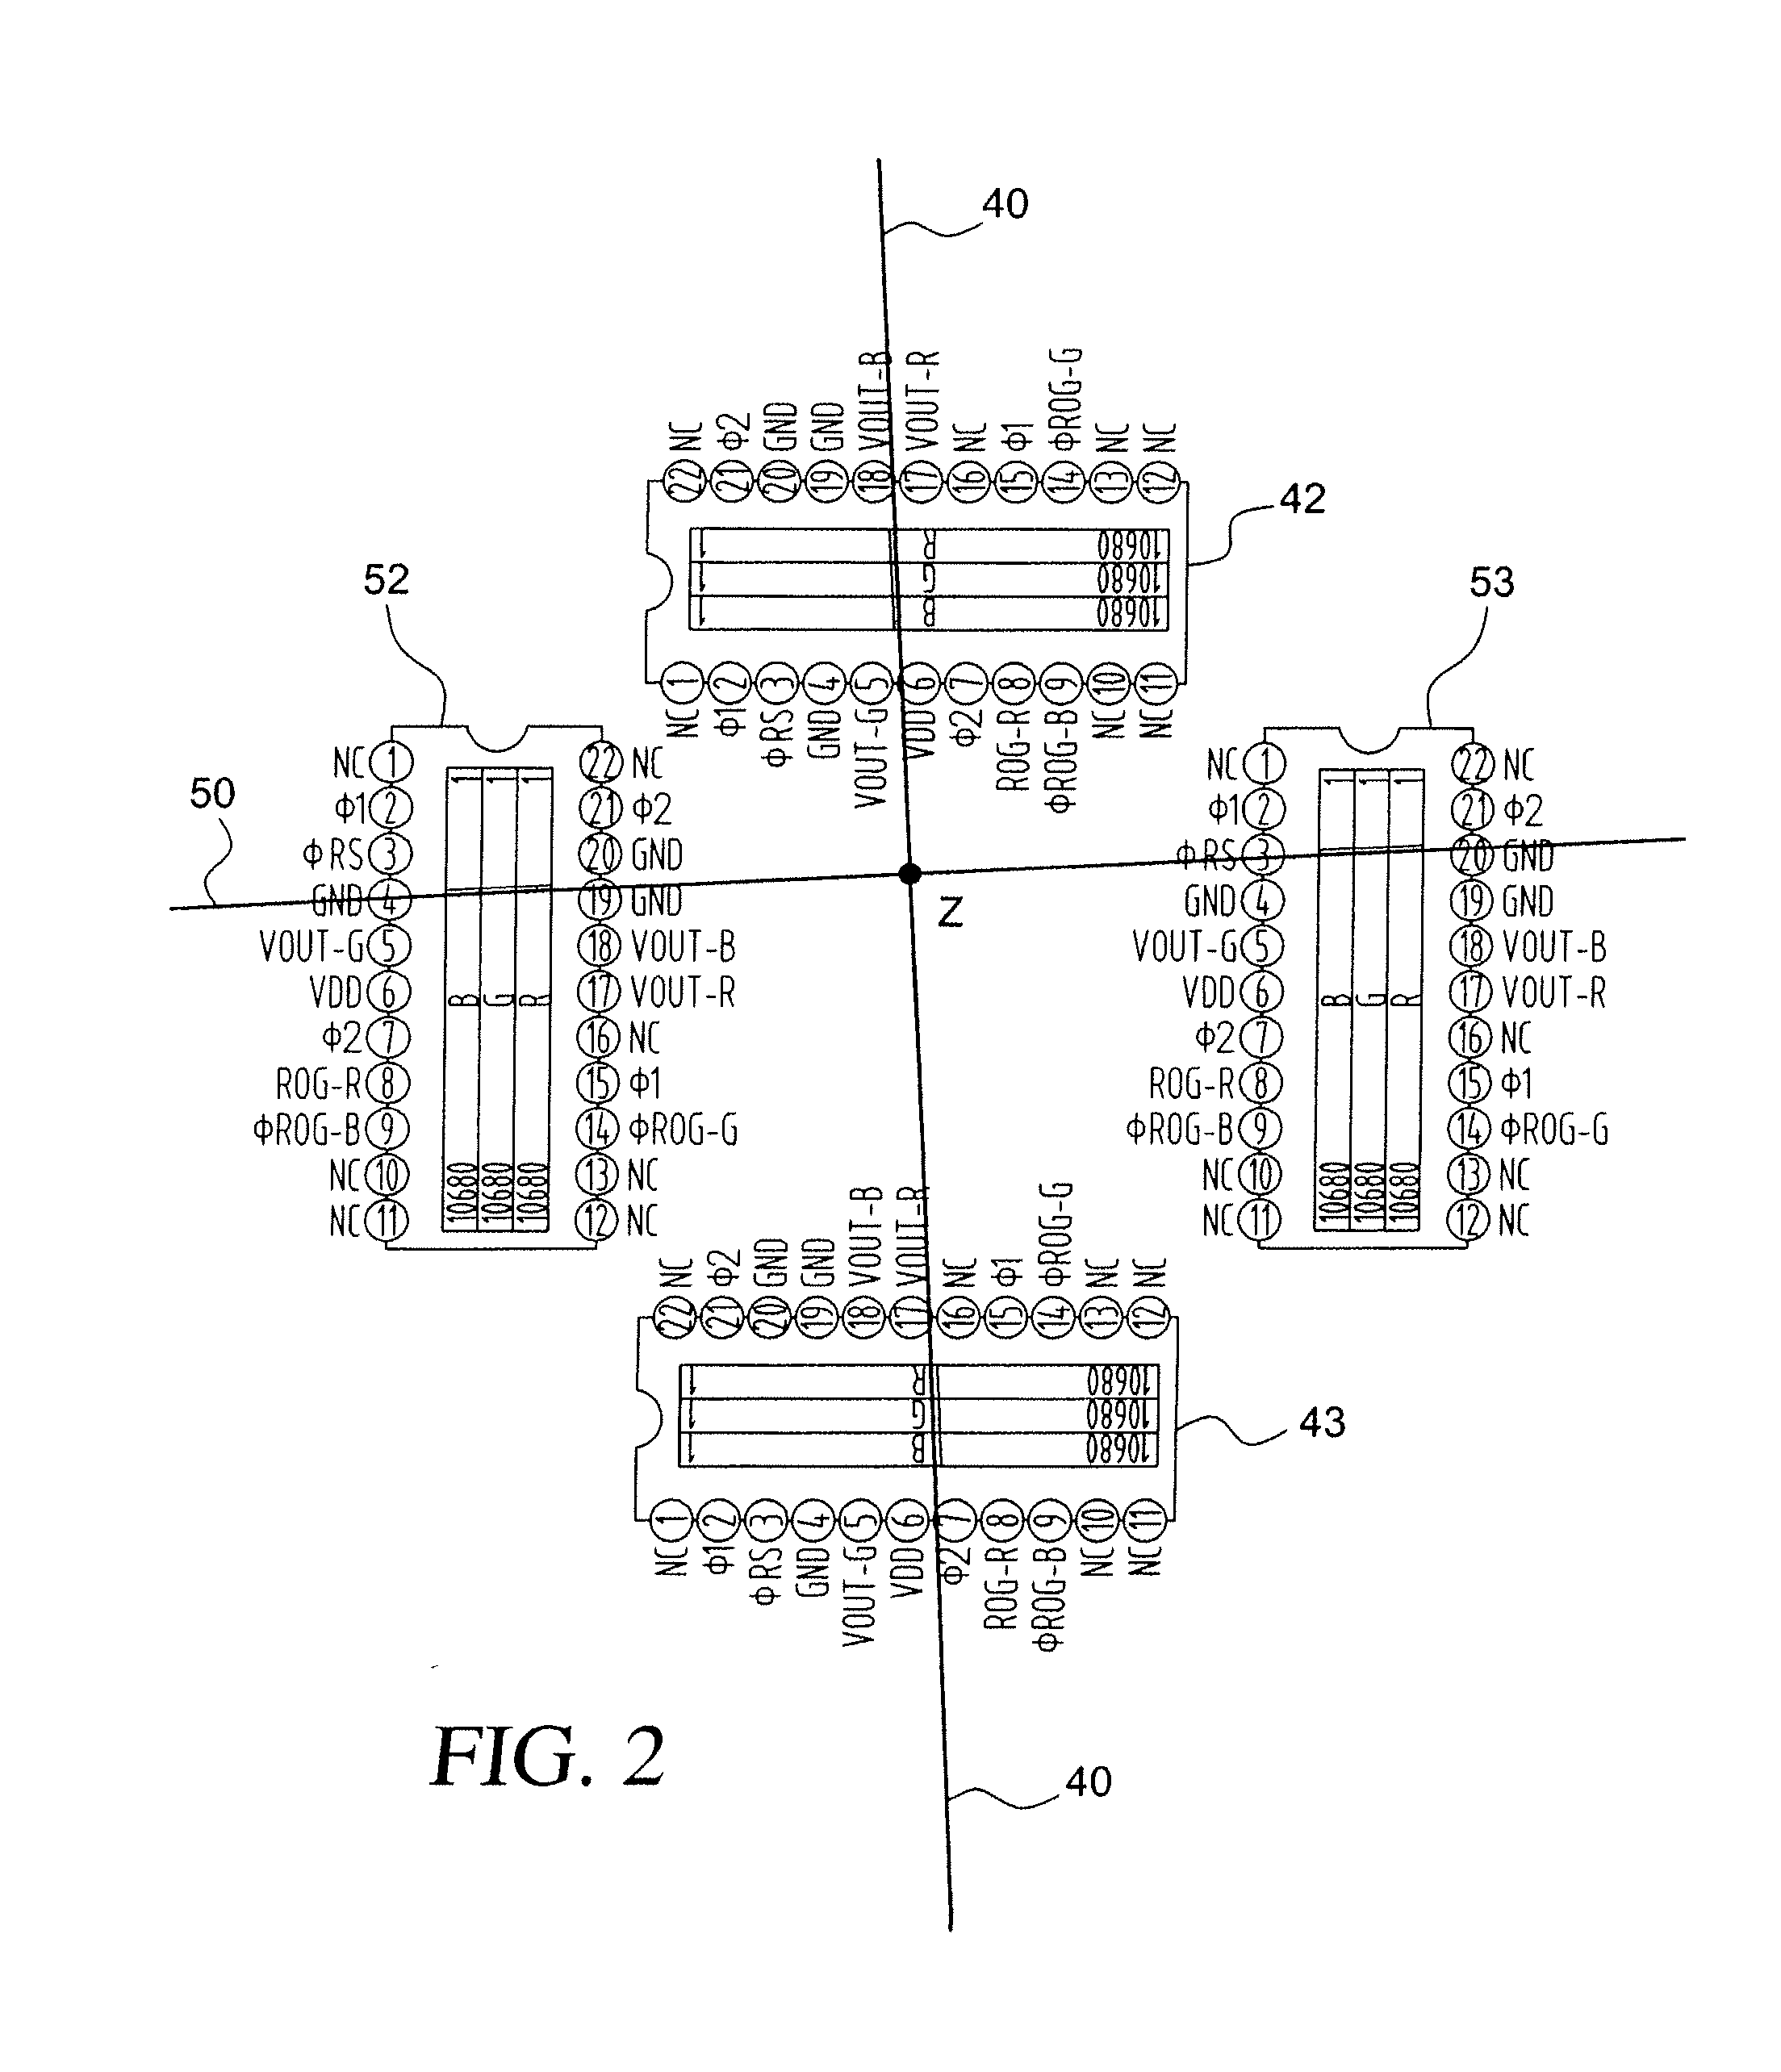 Device and process for quantitative assessment of the three-dimensional position of two machine parts, shafts, spindles, workpieces or other articles relative to one another